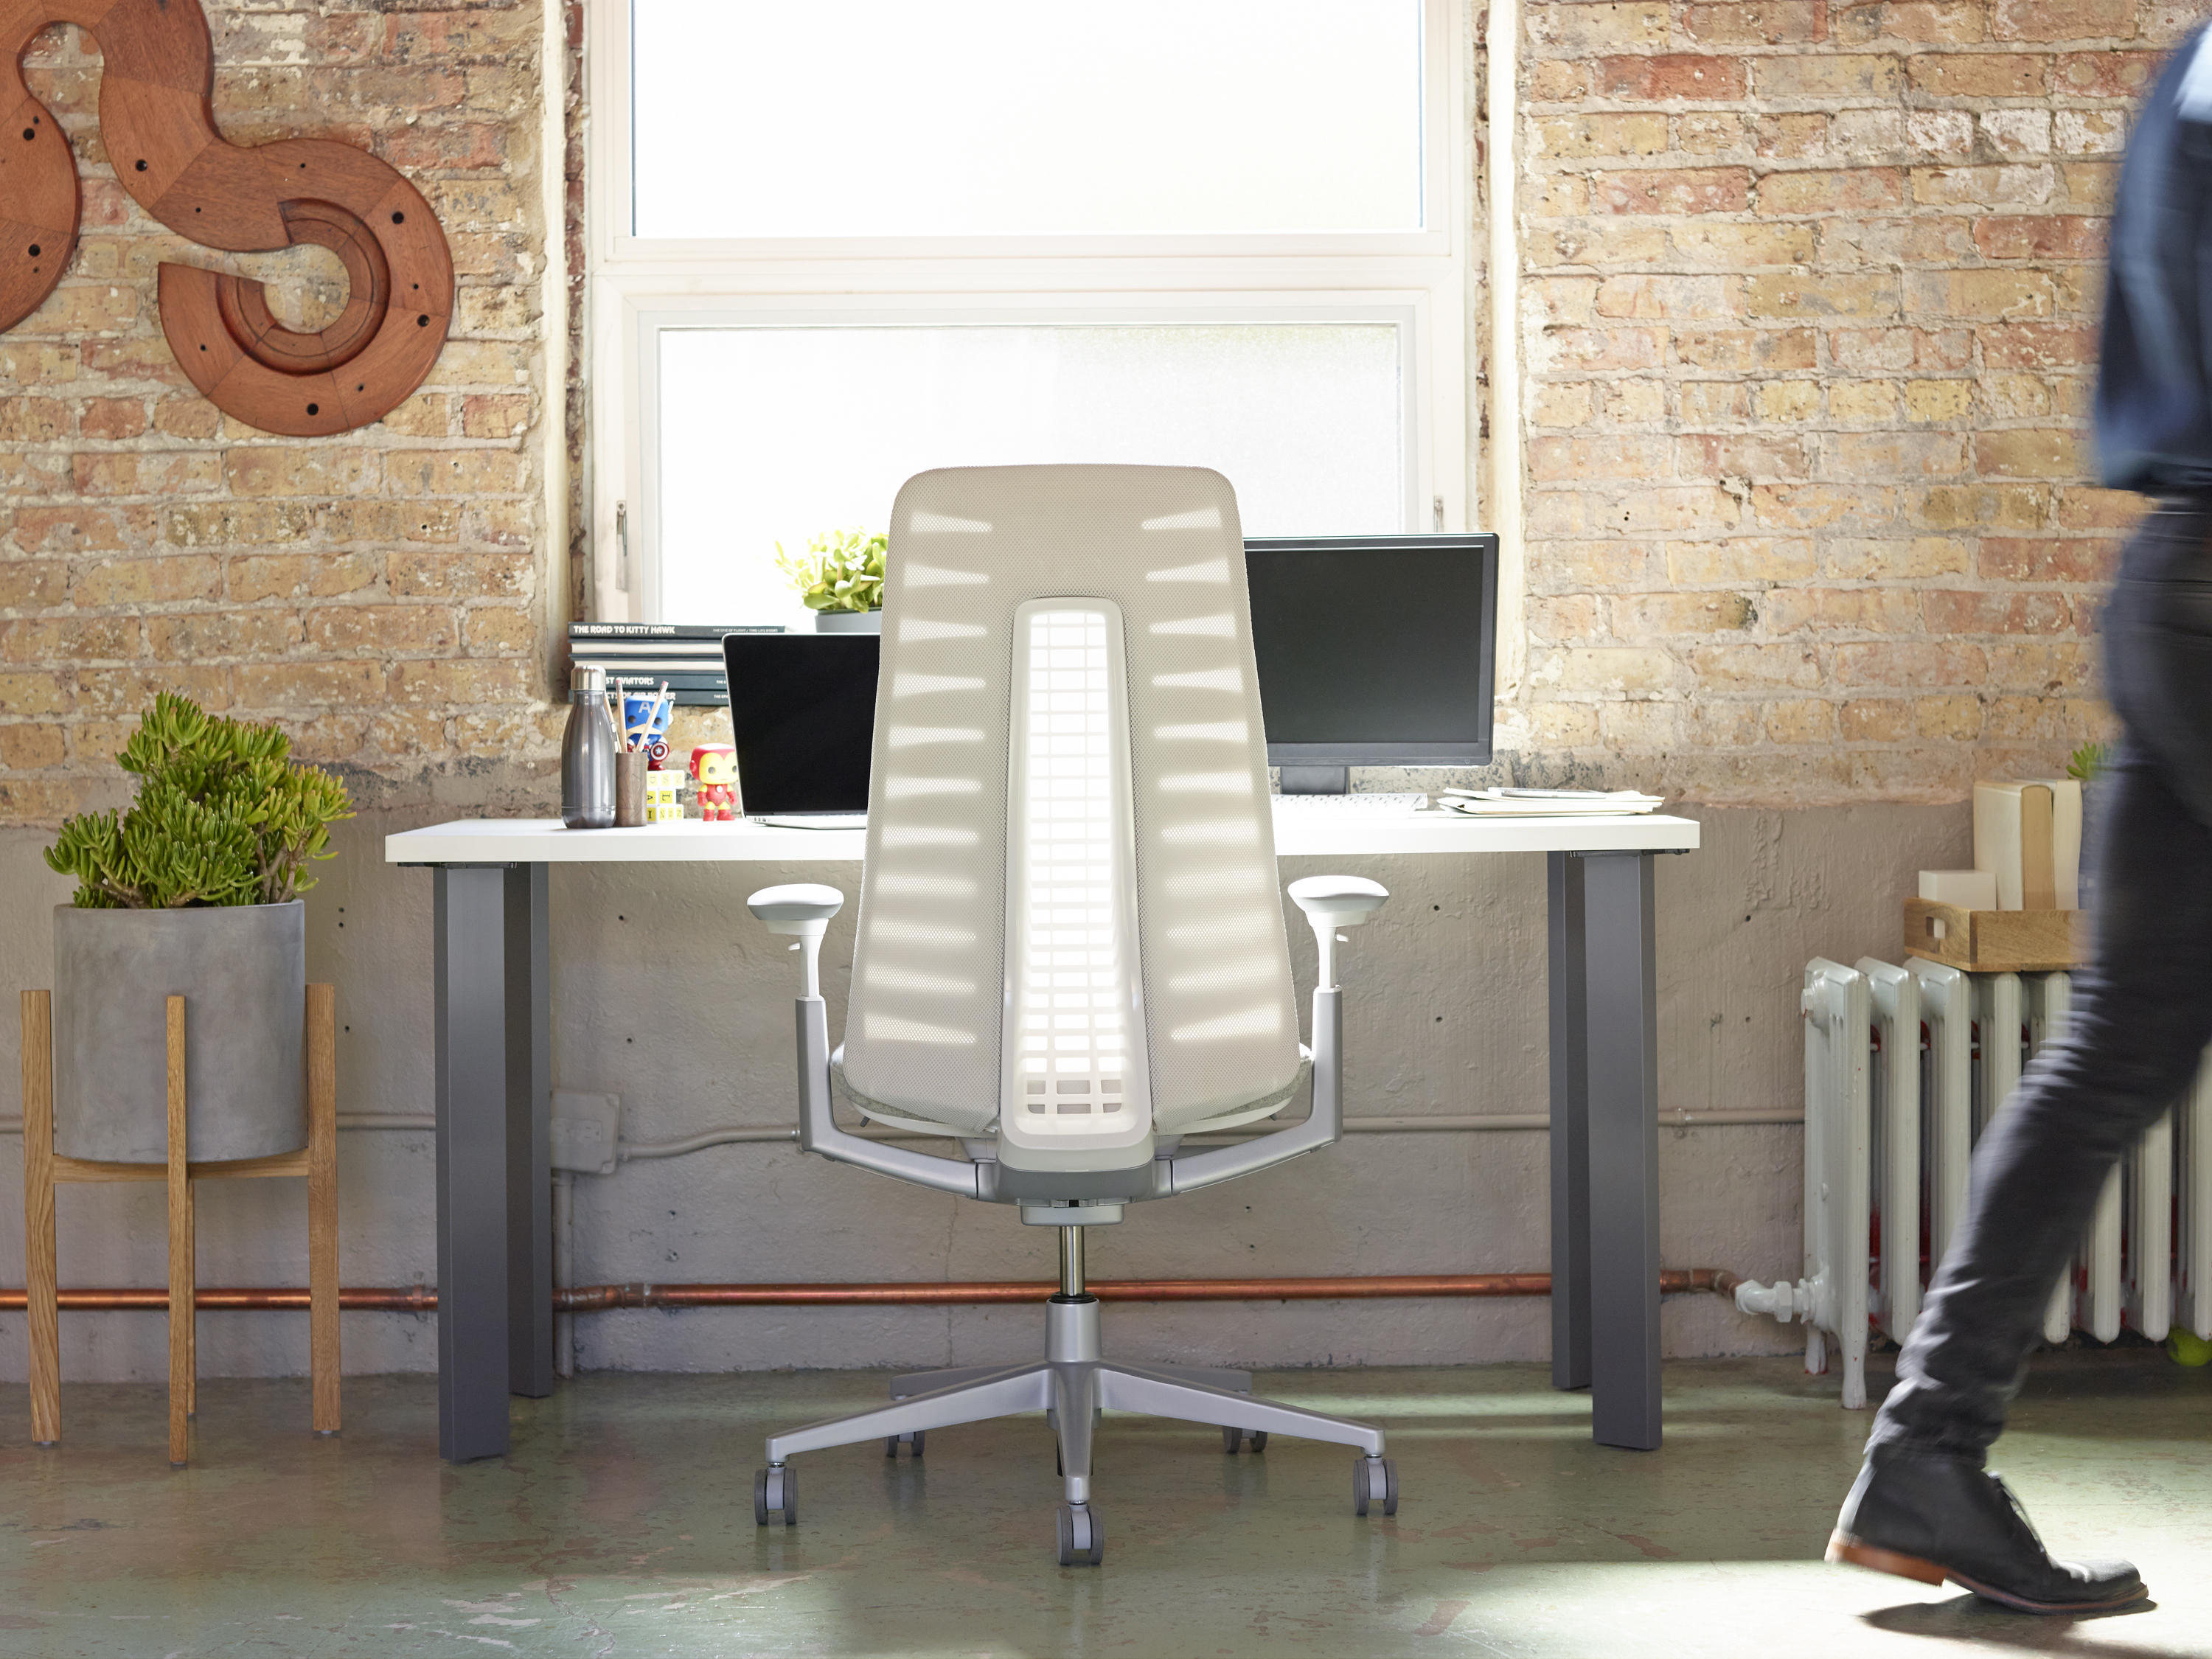 Five office chair typologies for every kind of work style